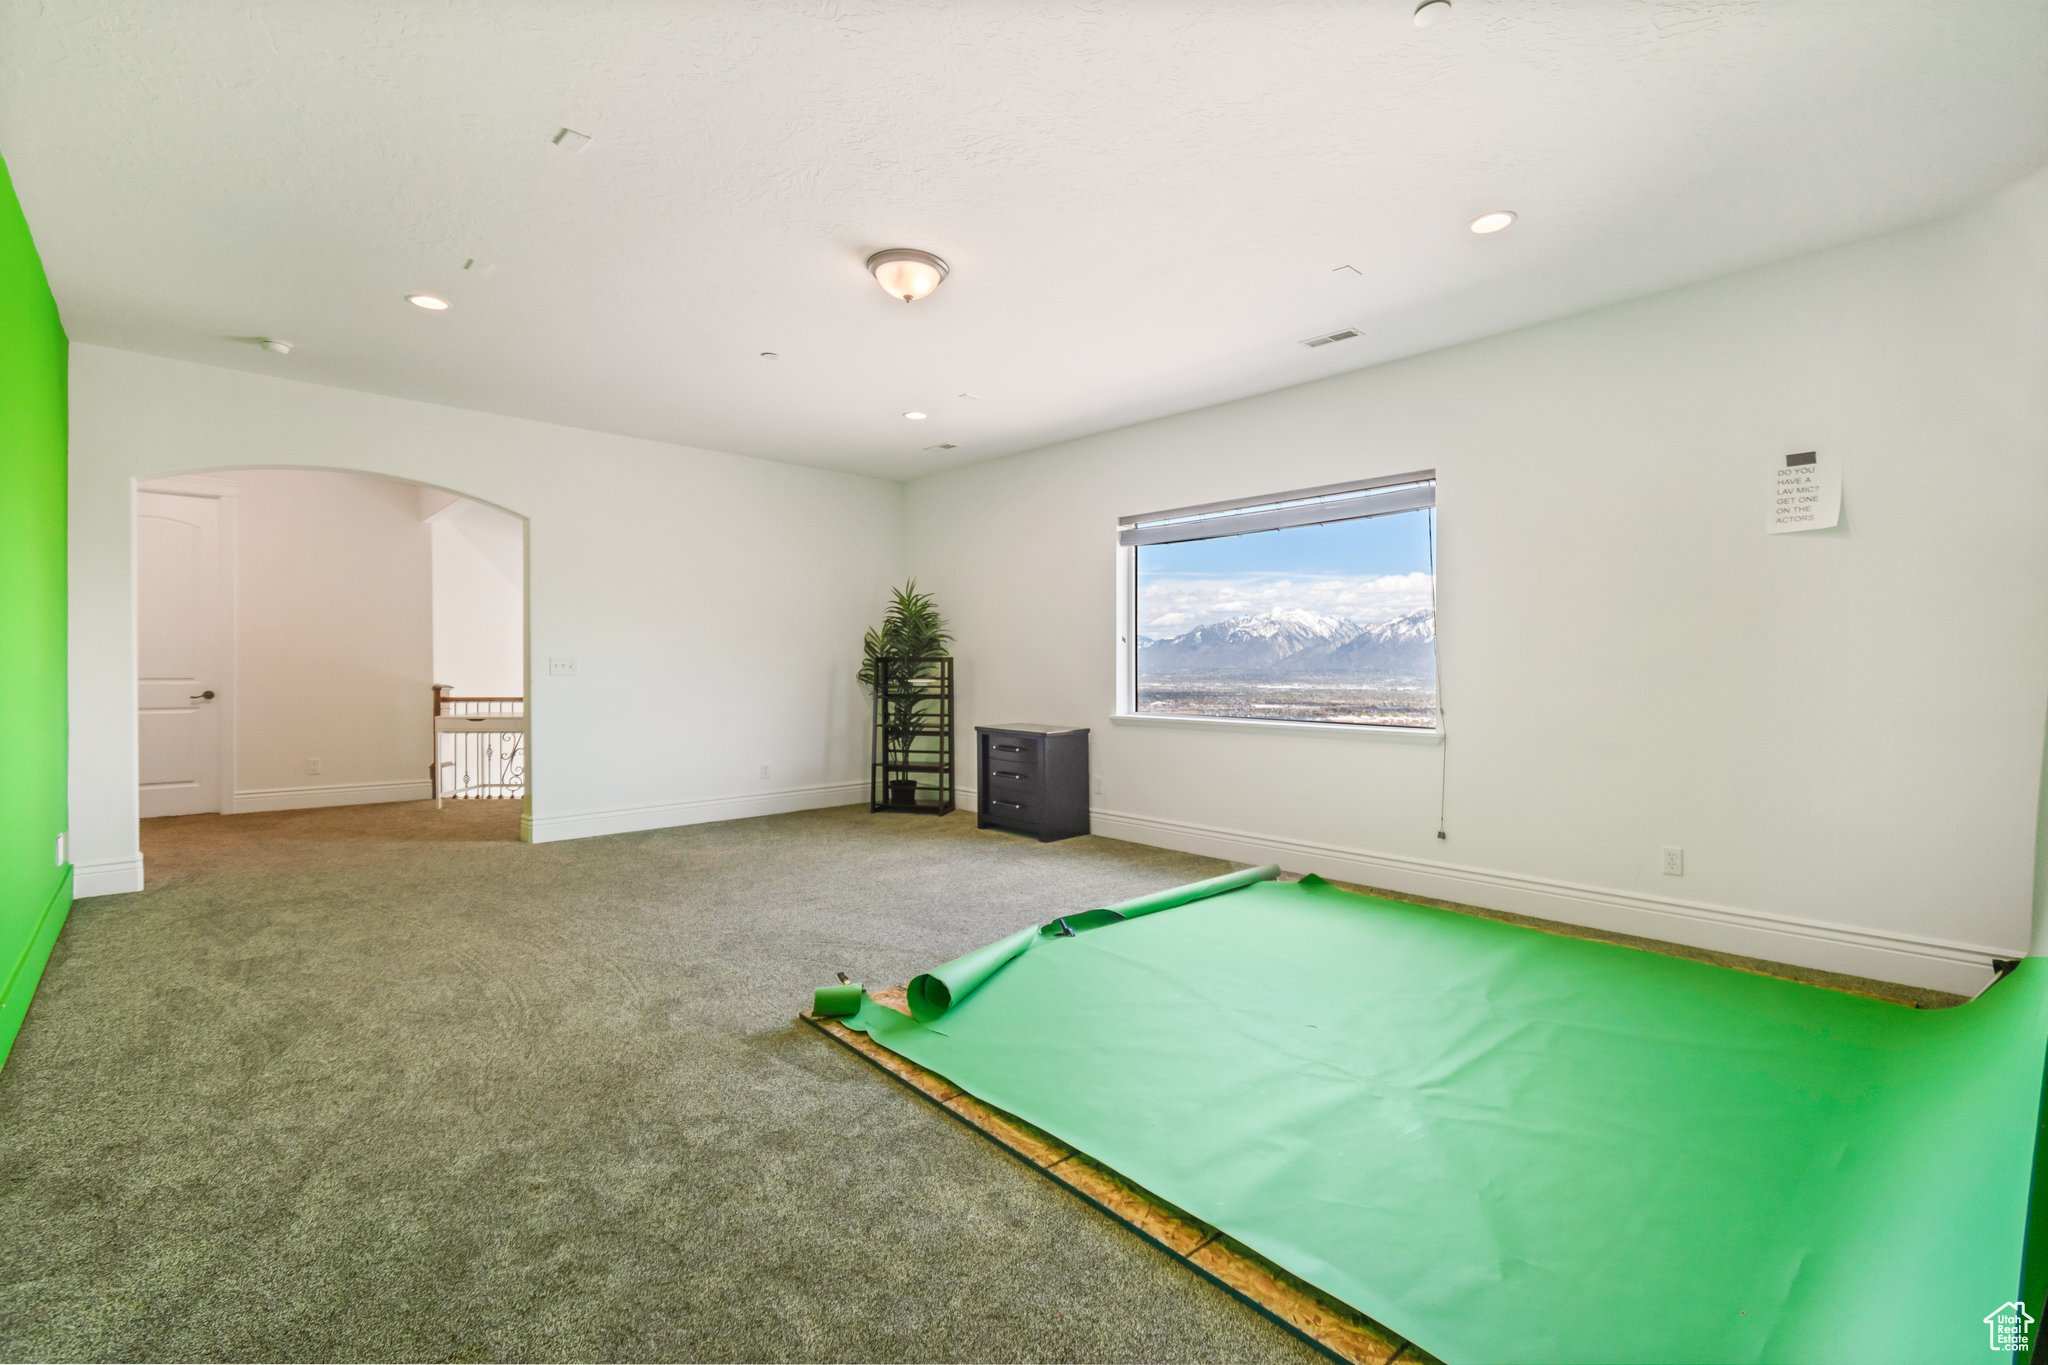 Game room with pool table and carpet